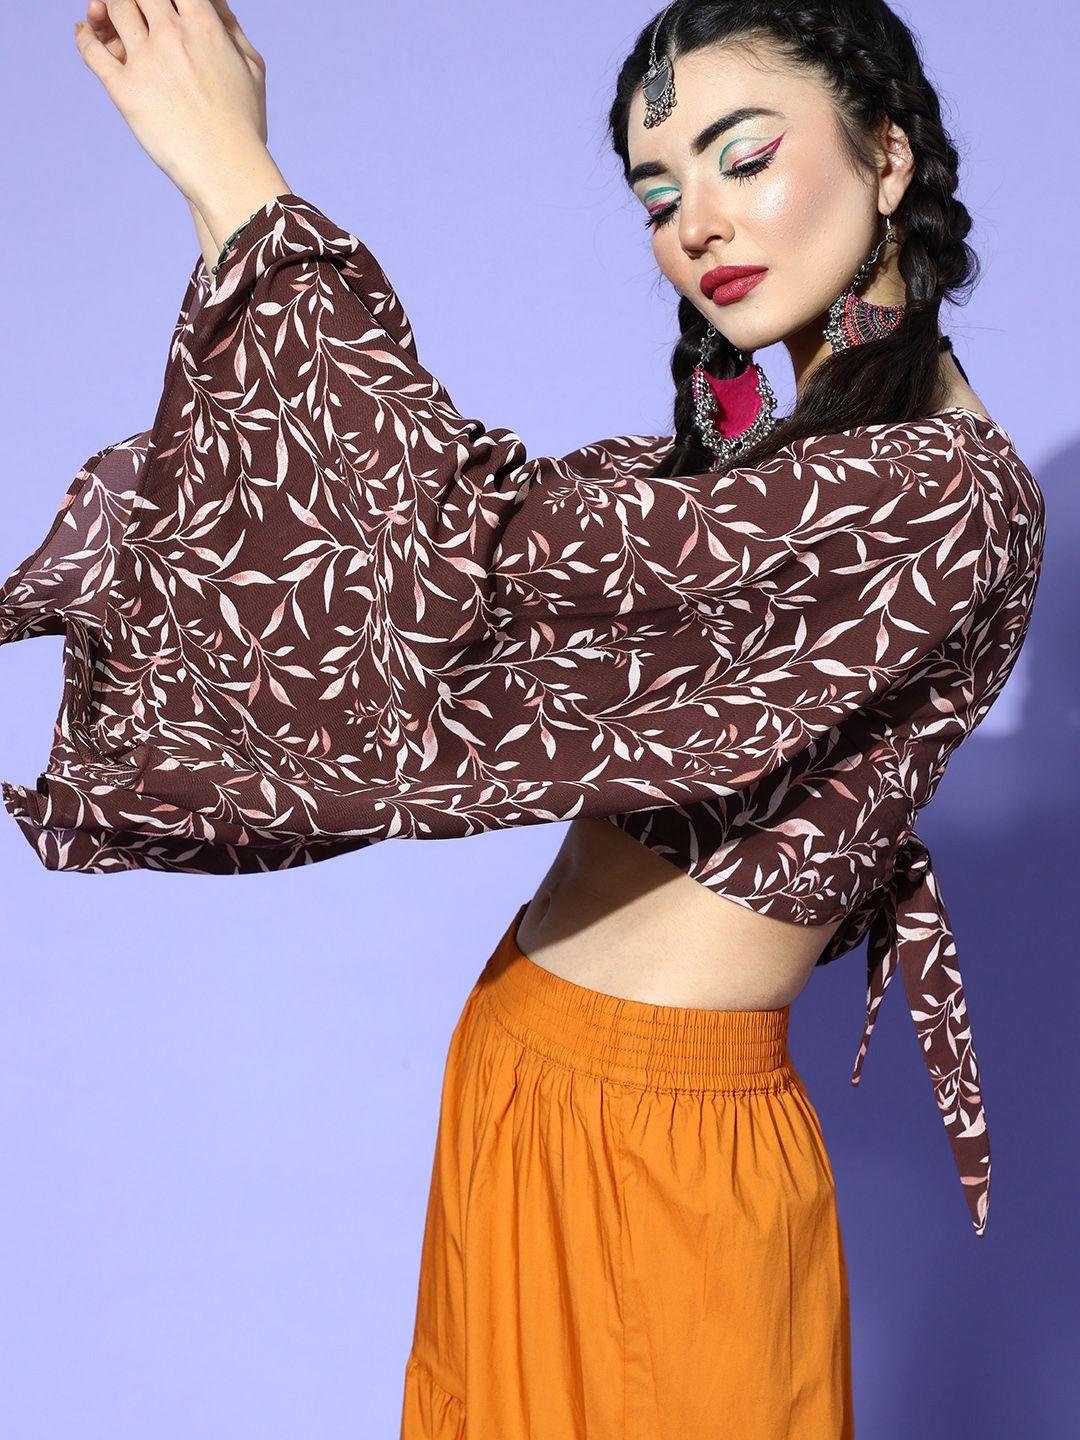 inddus-women-chic-brown-floral-ethnic-fusion-top